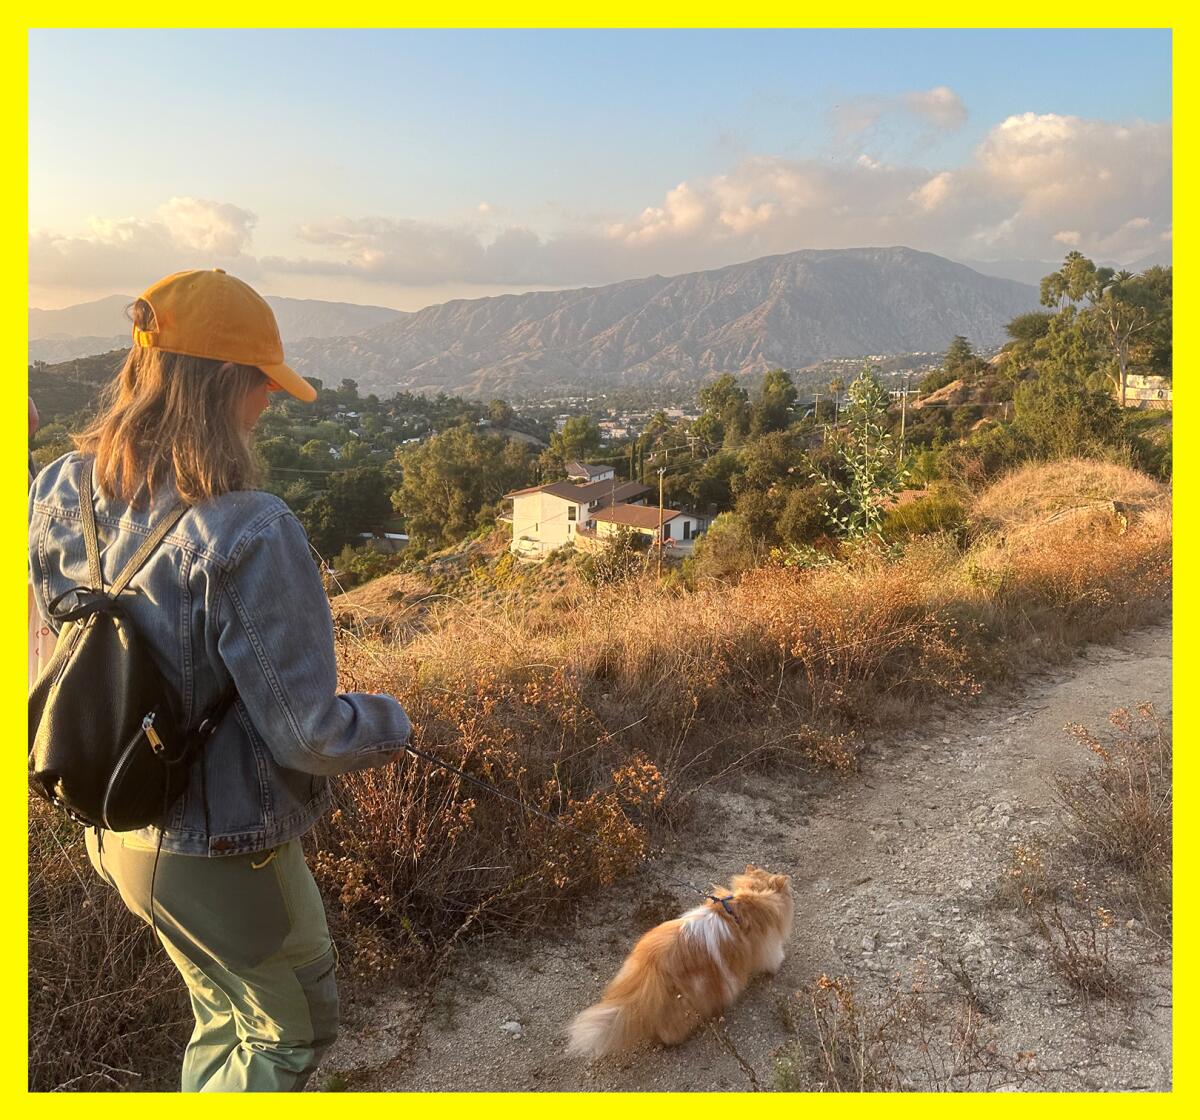 Lila Seidman walking a cat on a leash in an outdoor setting with a view of mountains in the distance. 